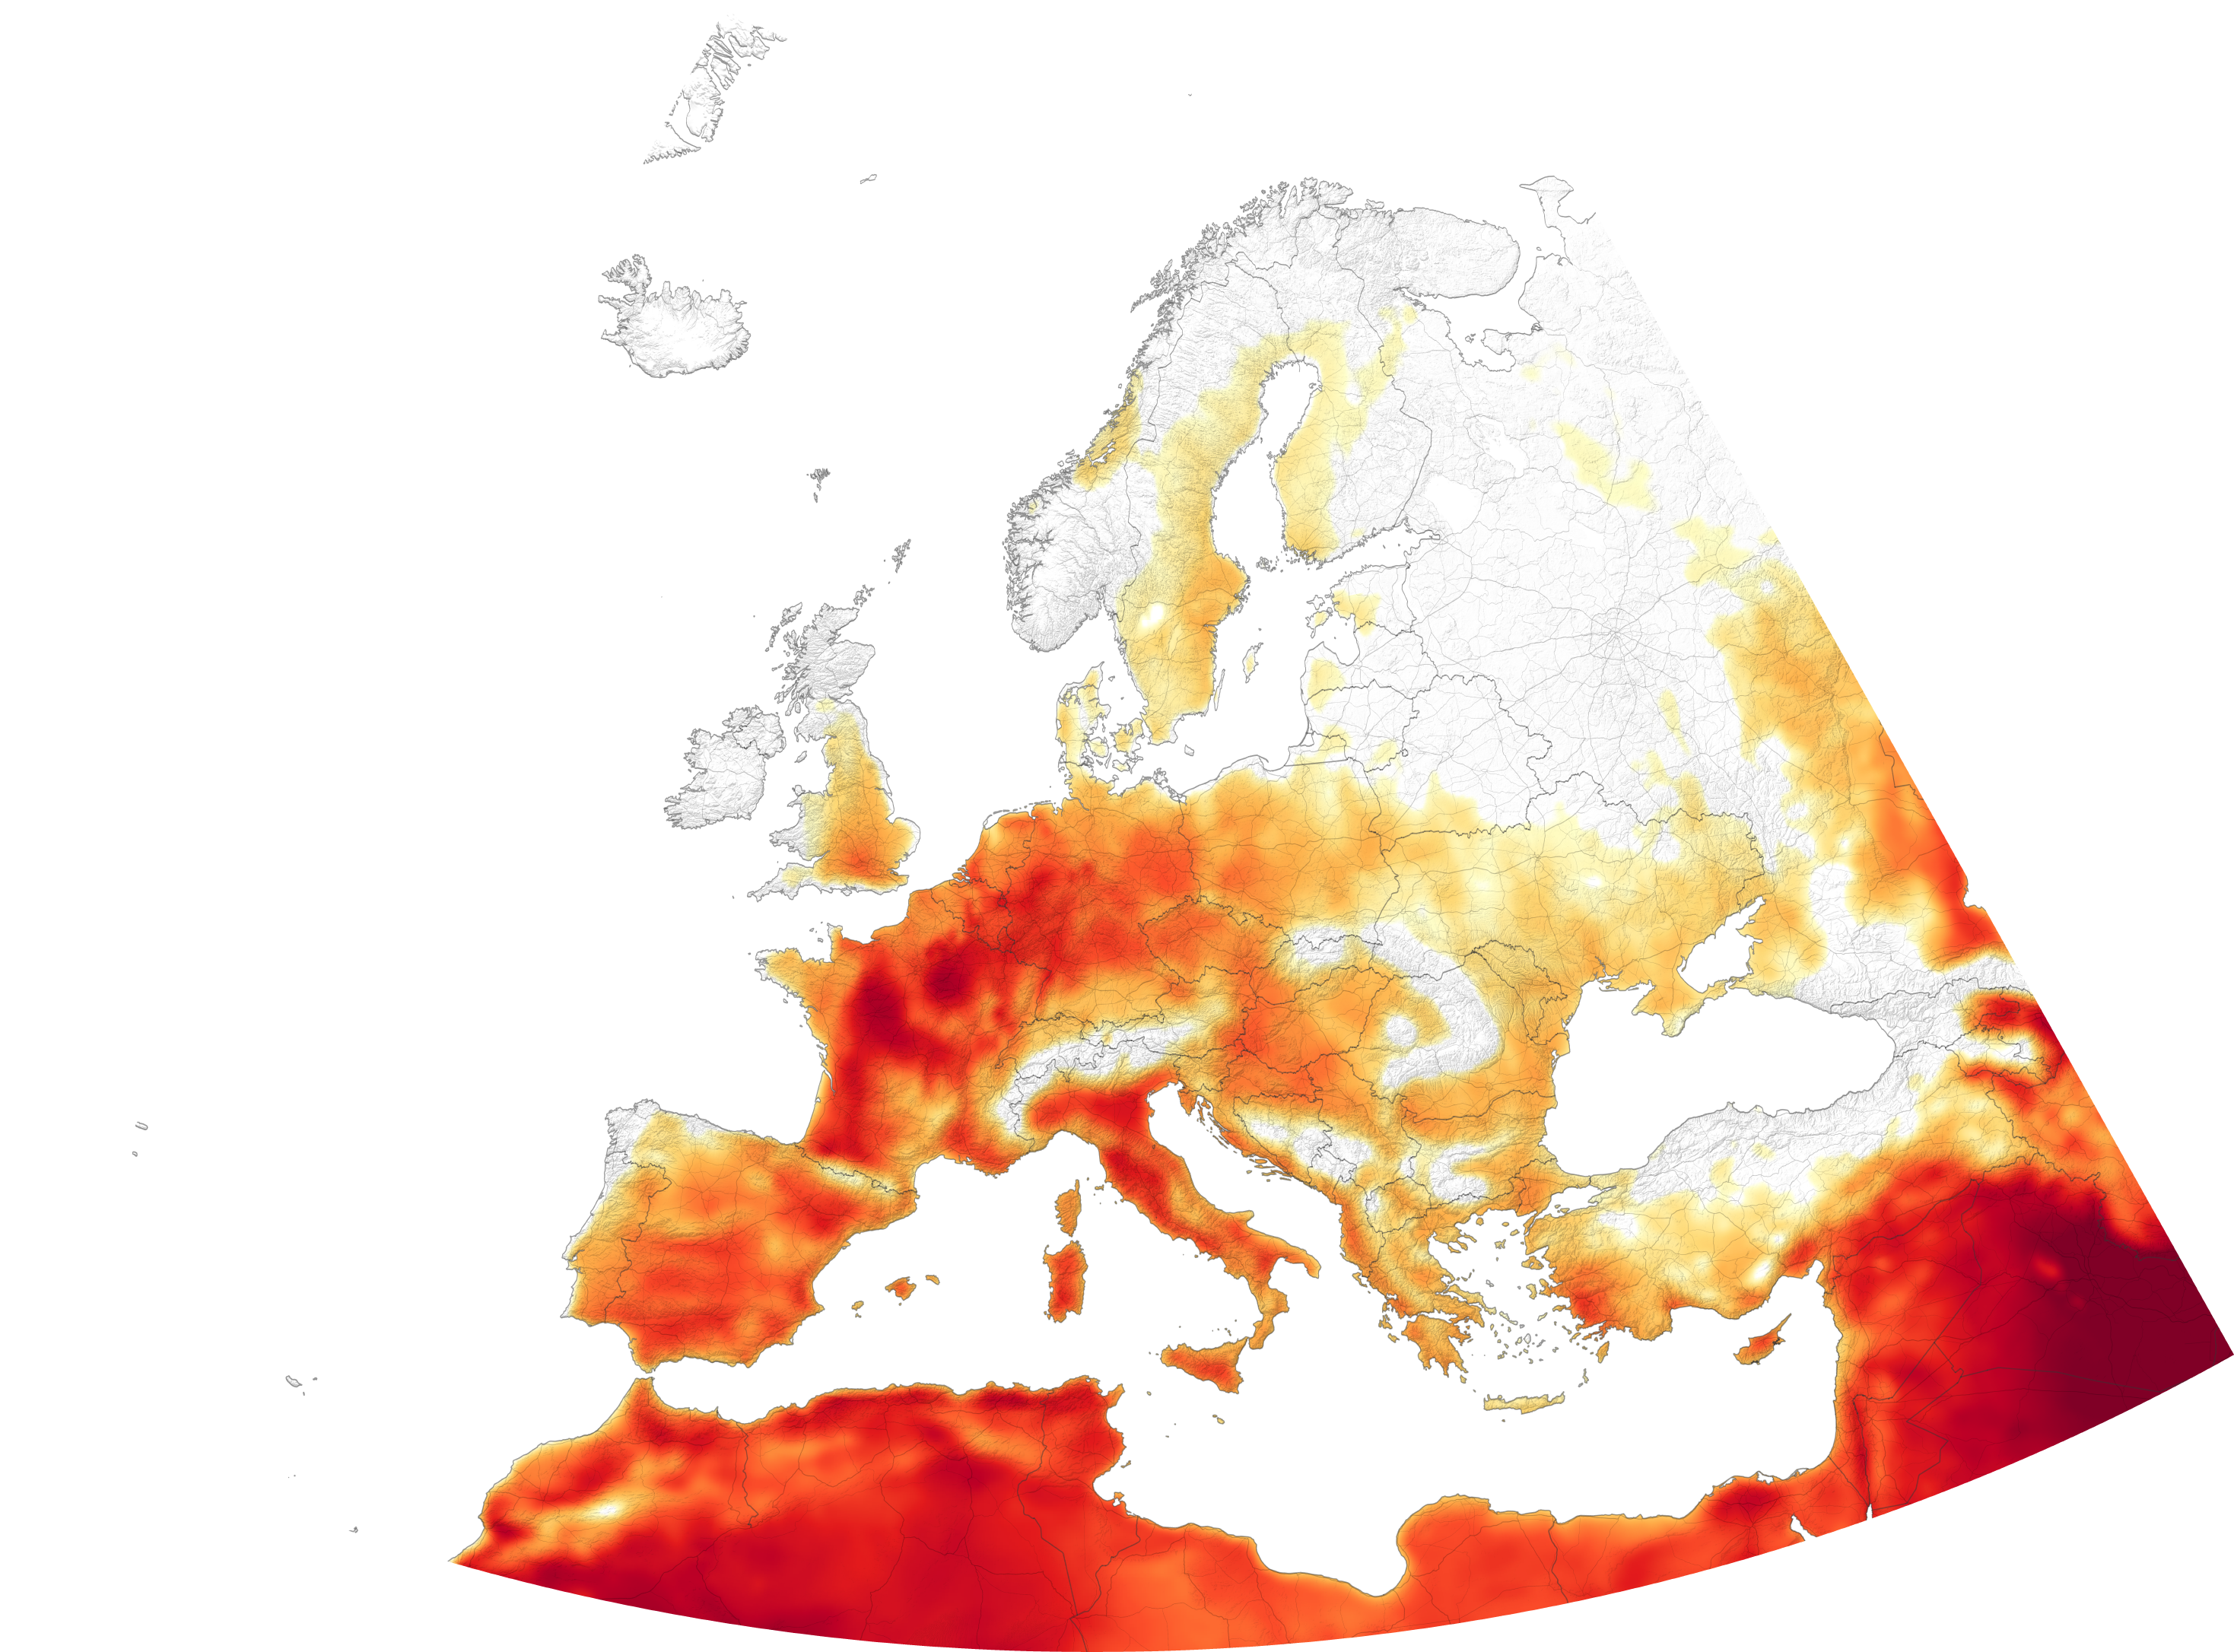 A Second Scorching Heatwave in Europe - related image preview